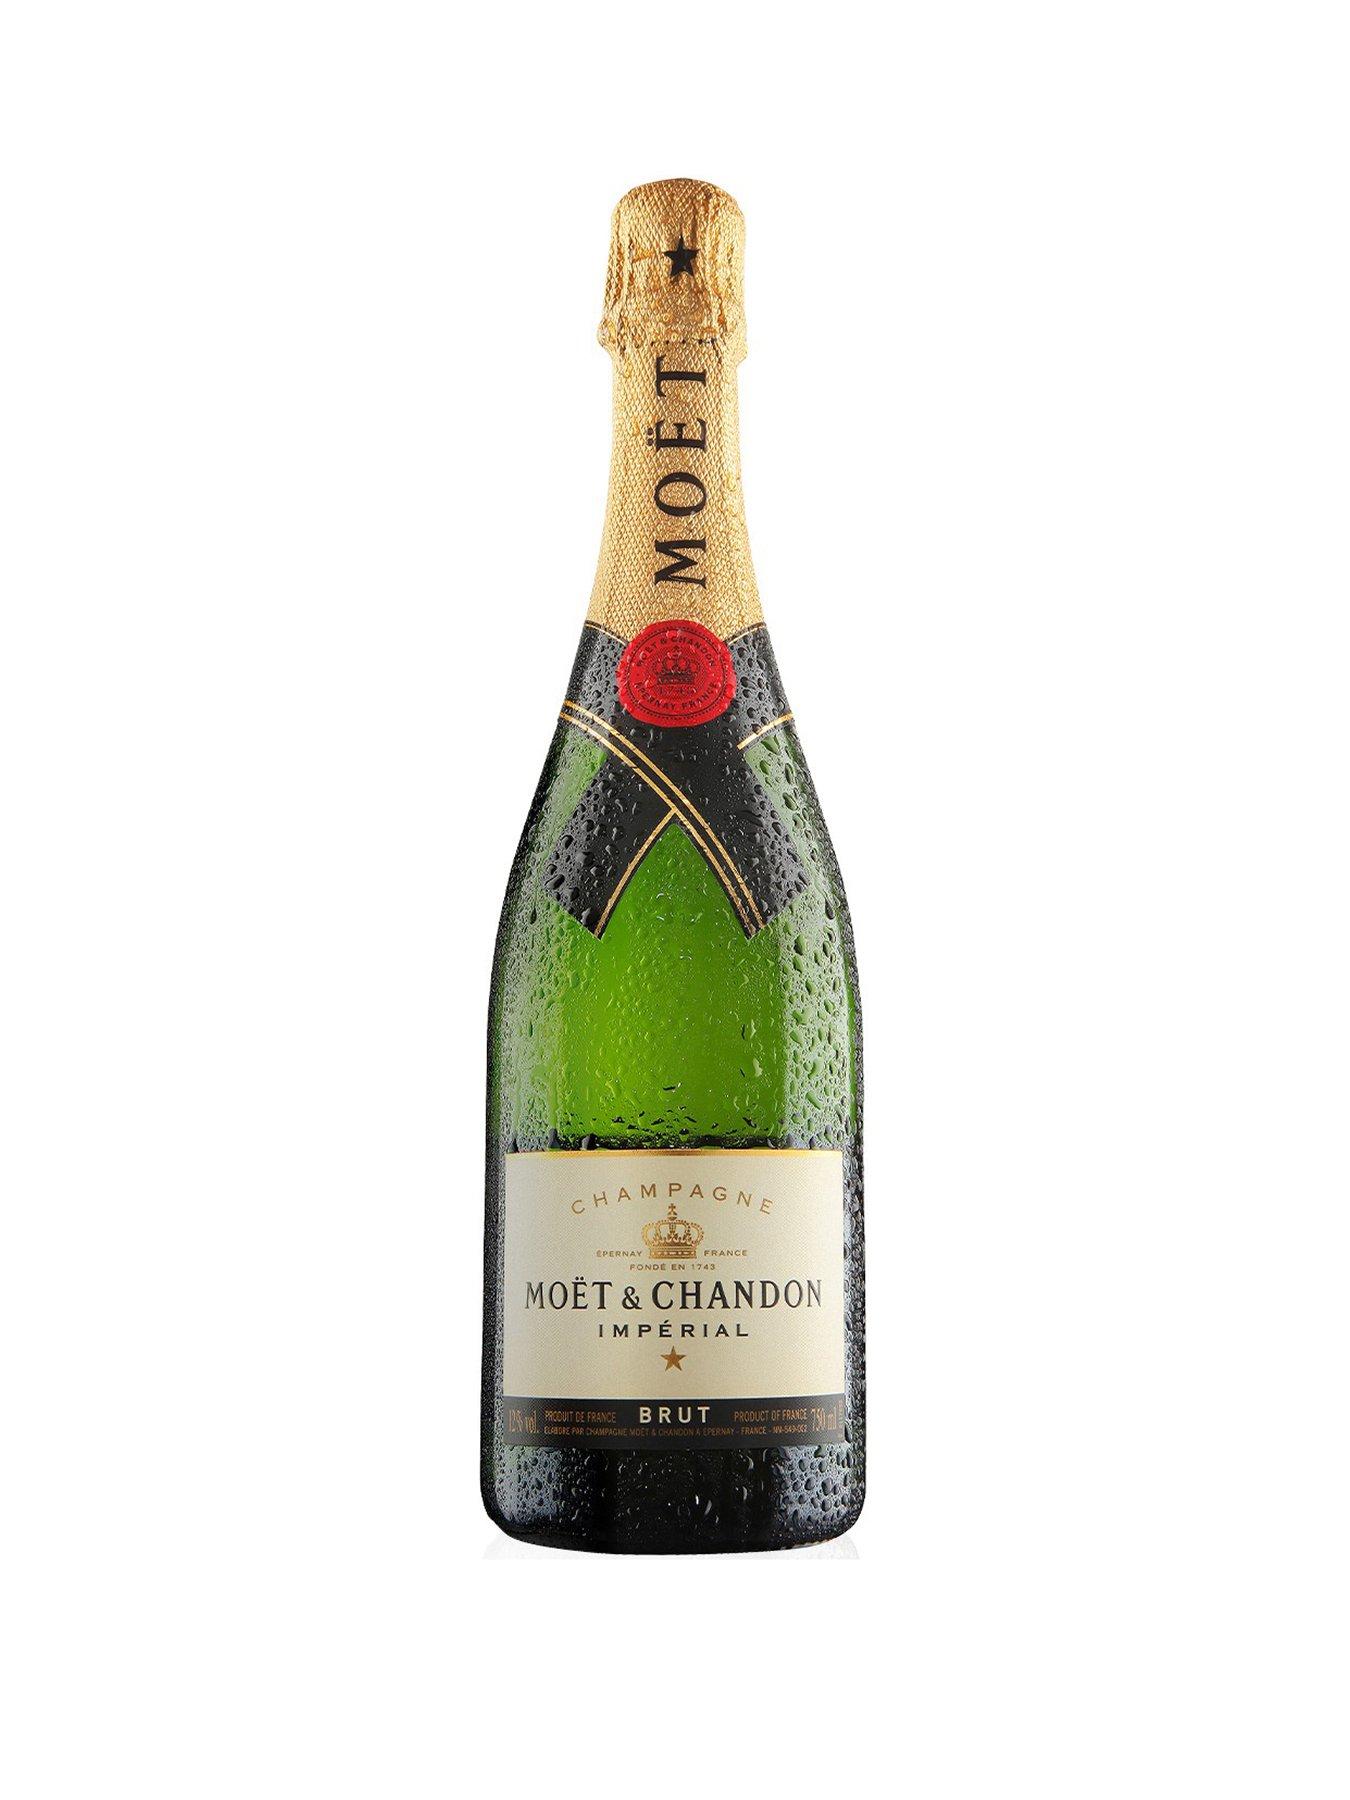 Where to buy Moet & Chandon 150th Anniversary Gold Bottle Imperial